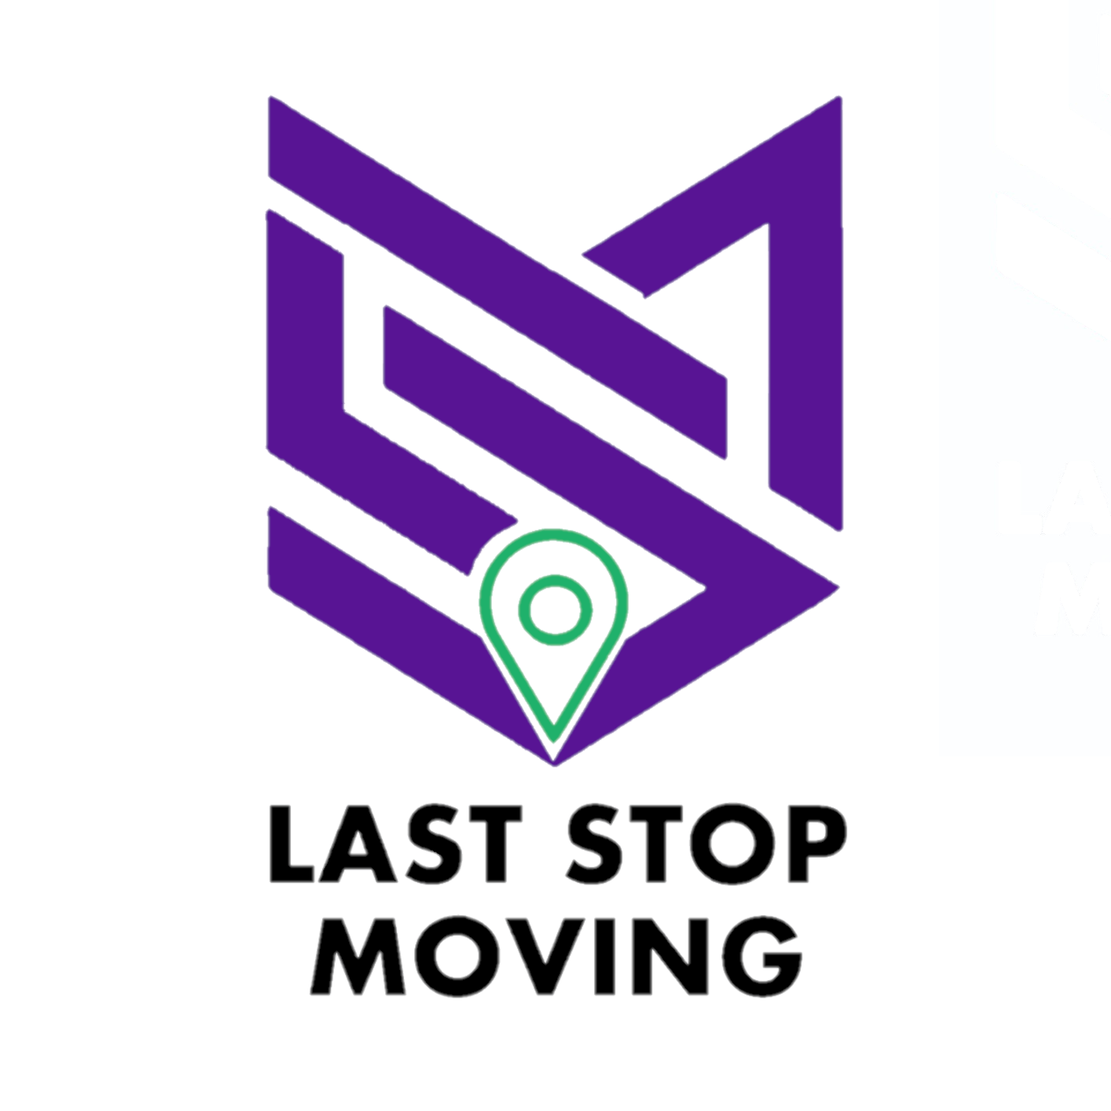 Laststop Moving